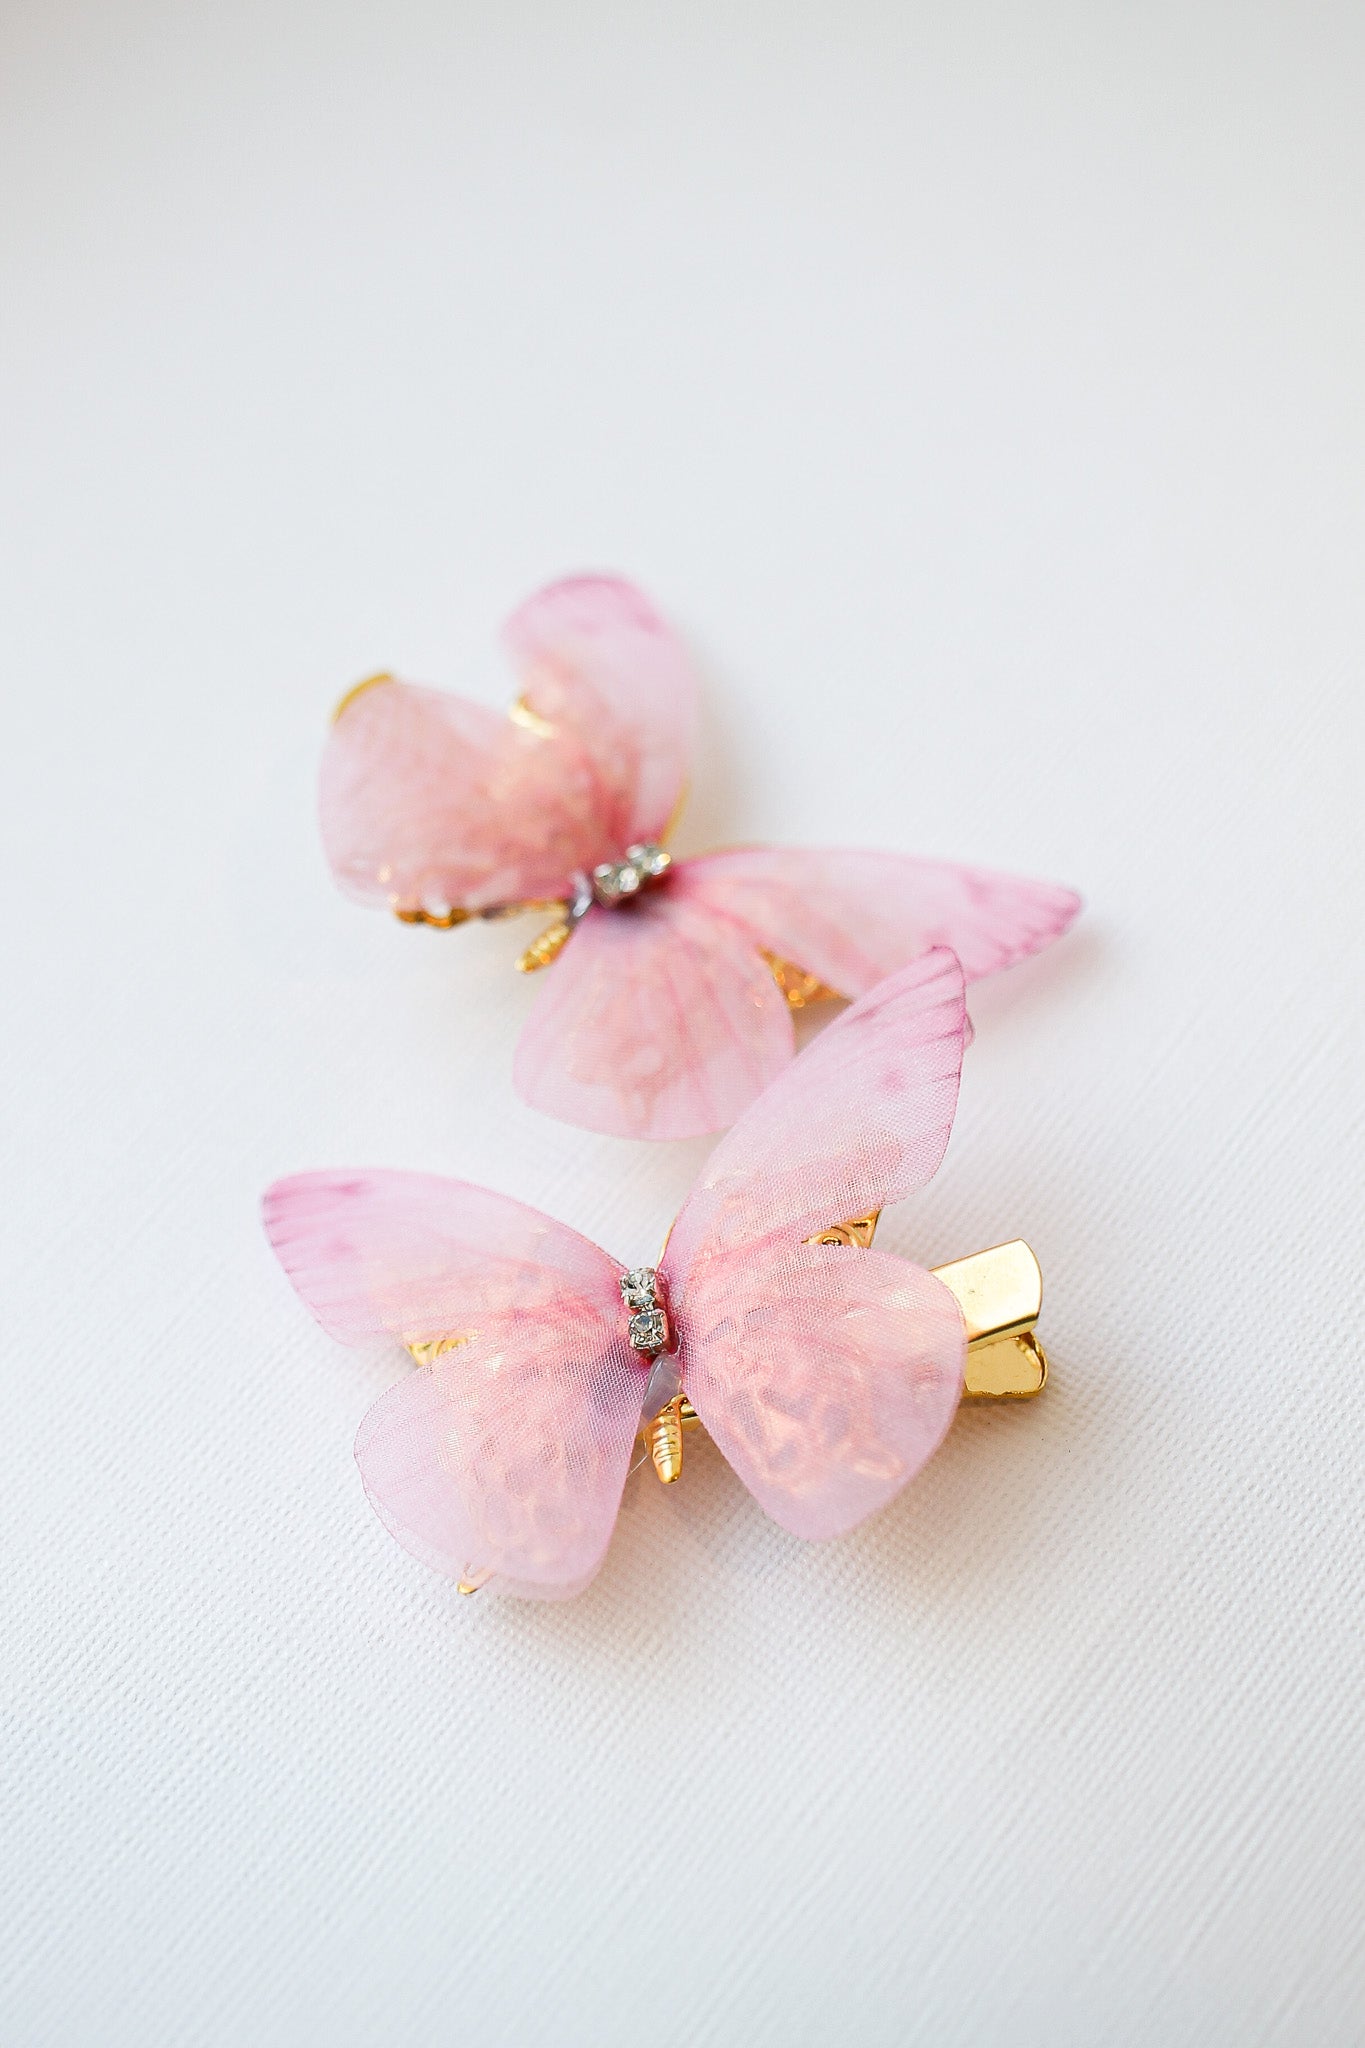 Butterfly Wings Hair Clips in Pink